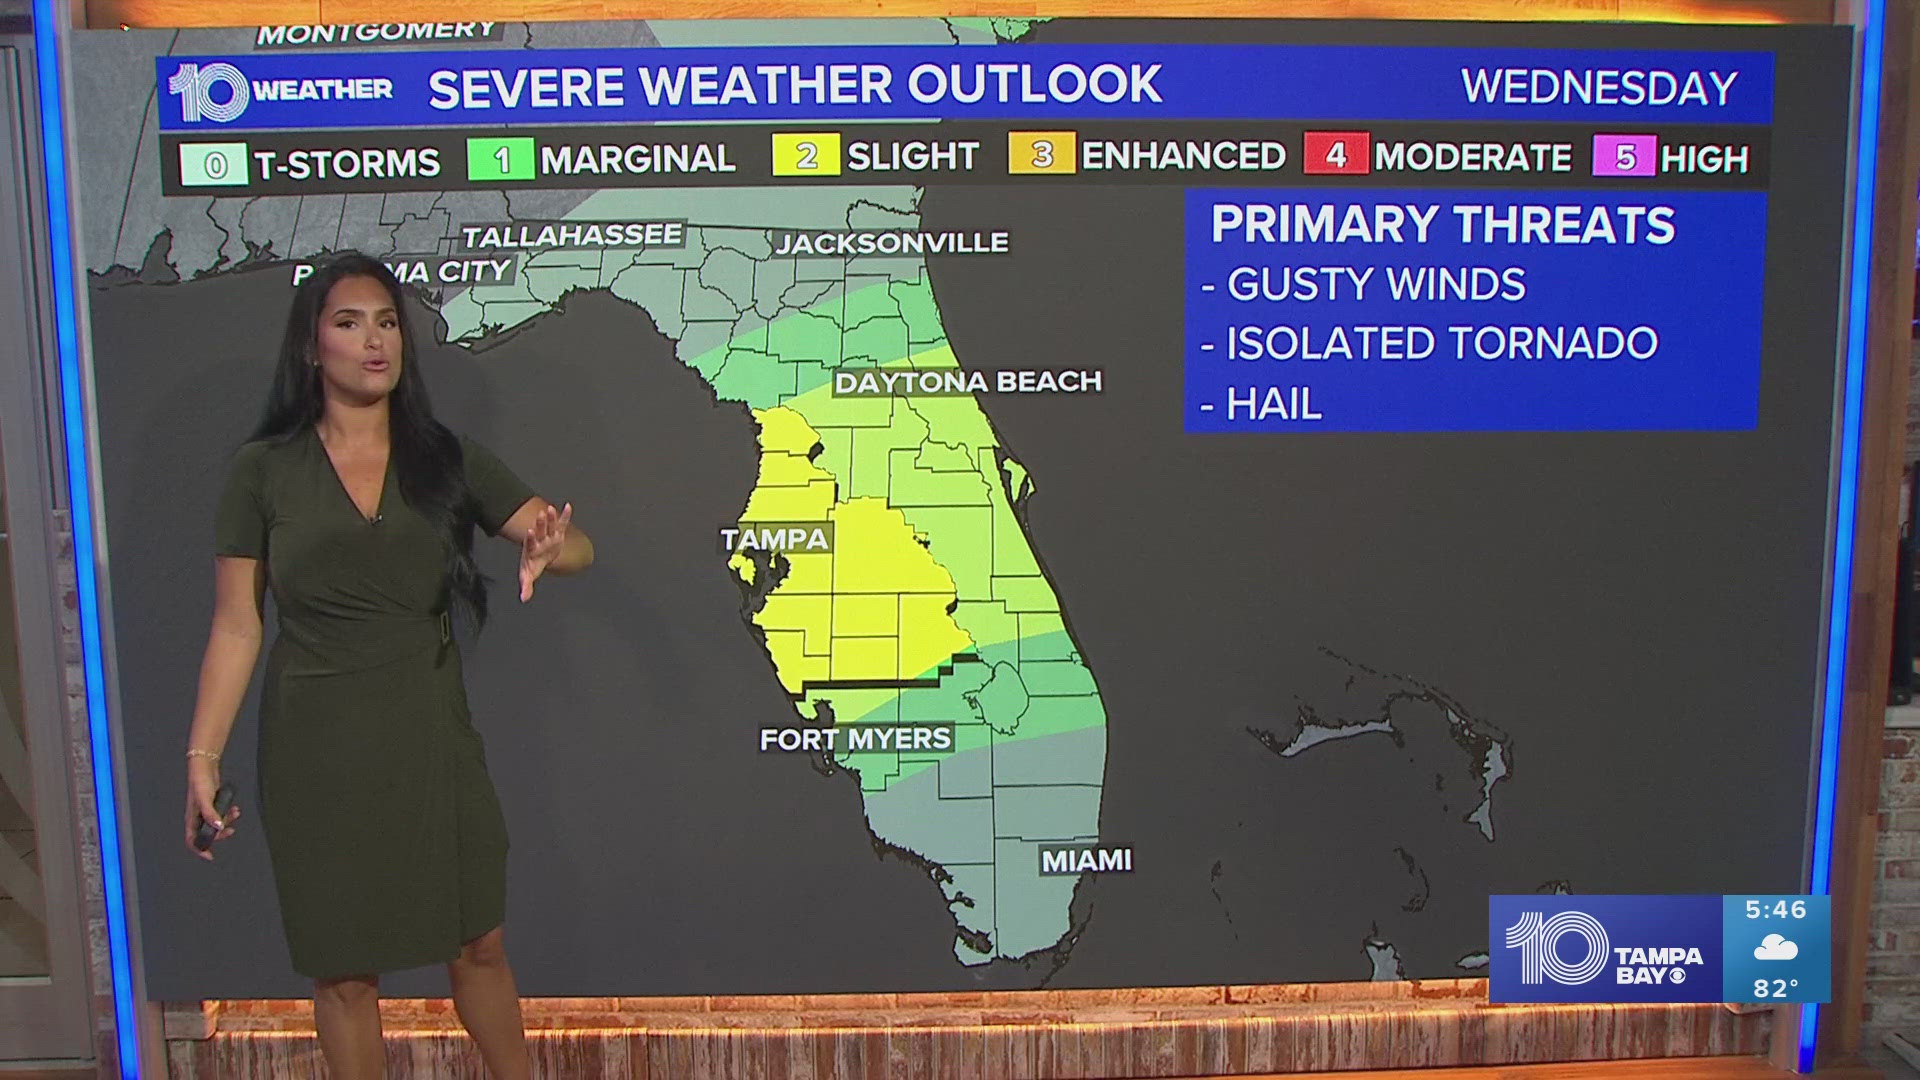 Humidity, showers and storms return with a "slight" risk for severe weather again today.